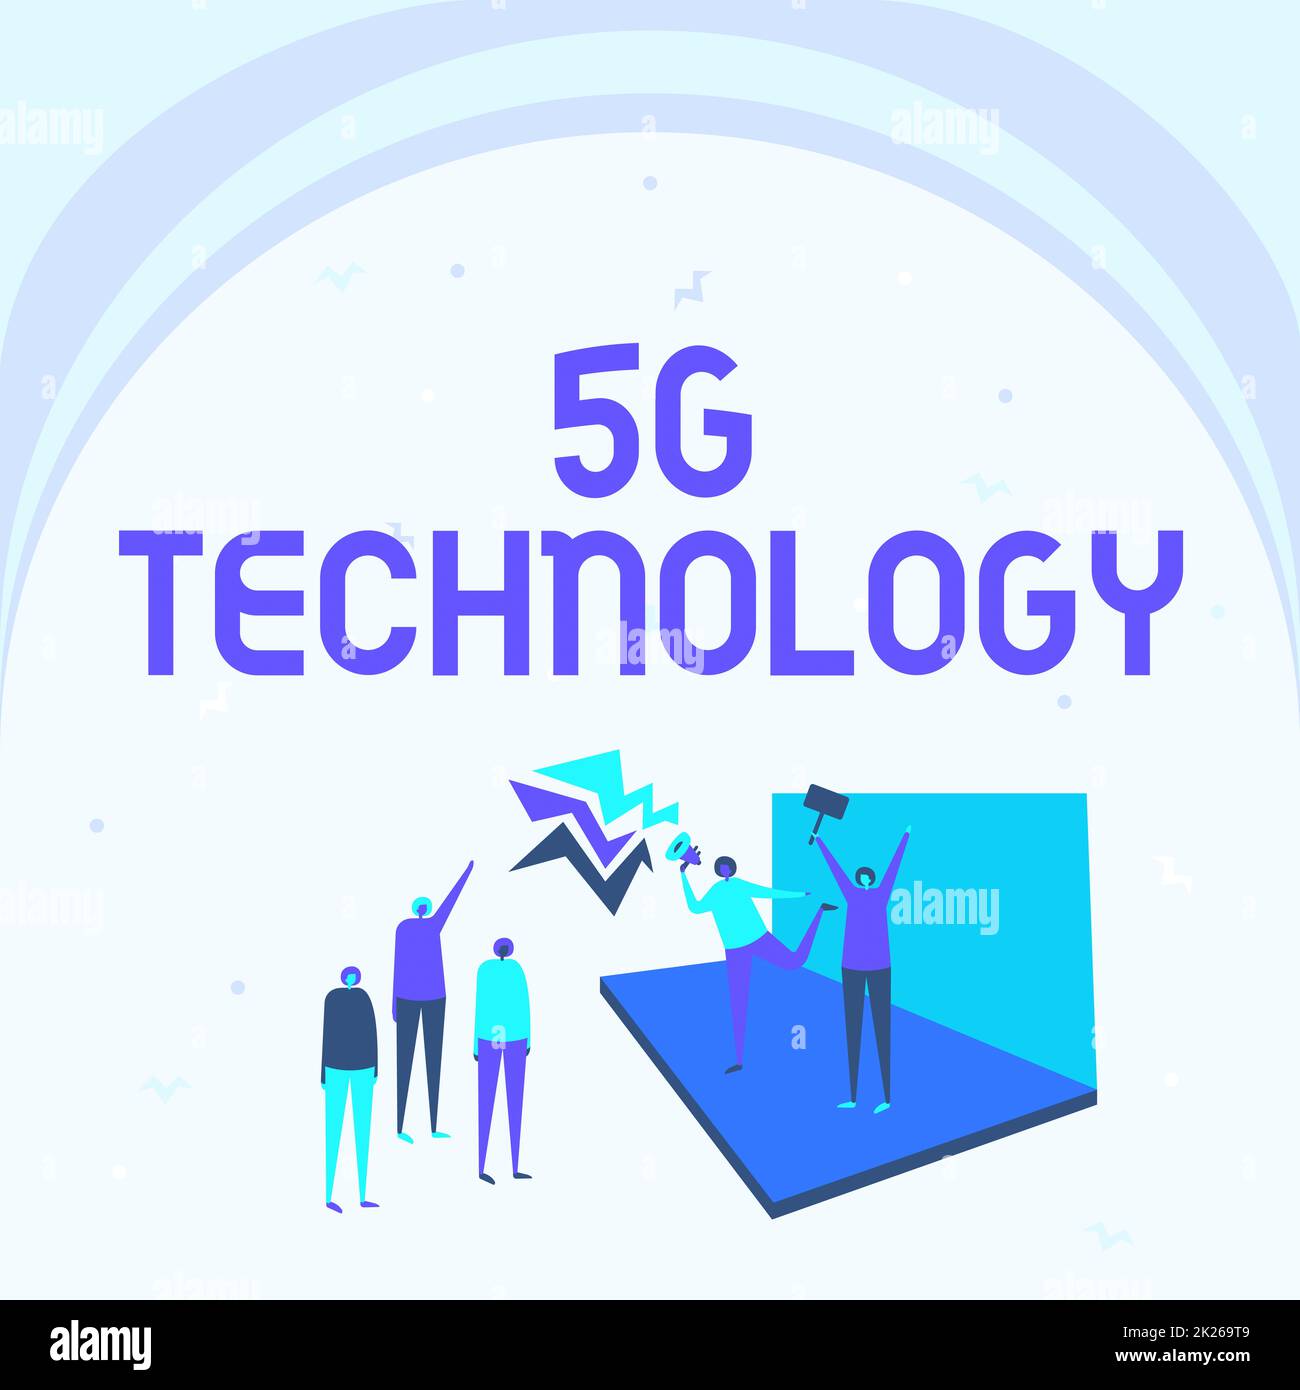 Text sign showing 5G Technology. Internet Concept highspeed mobile Internet, new generation wireless system networks Illustration Of Couple On Stage Making Announcement To The Small Crowd. Stock Photo